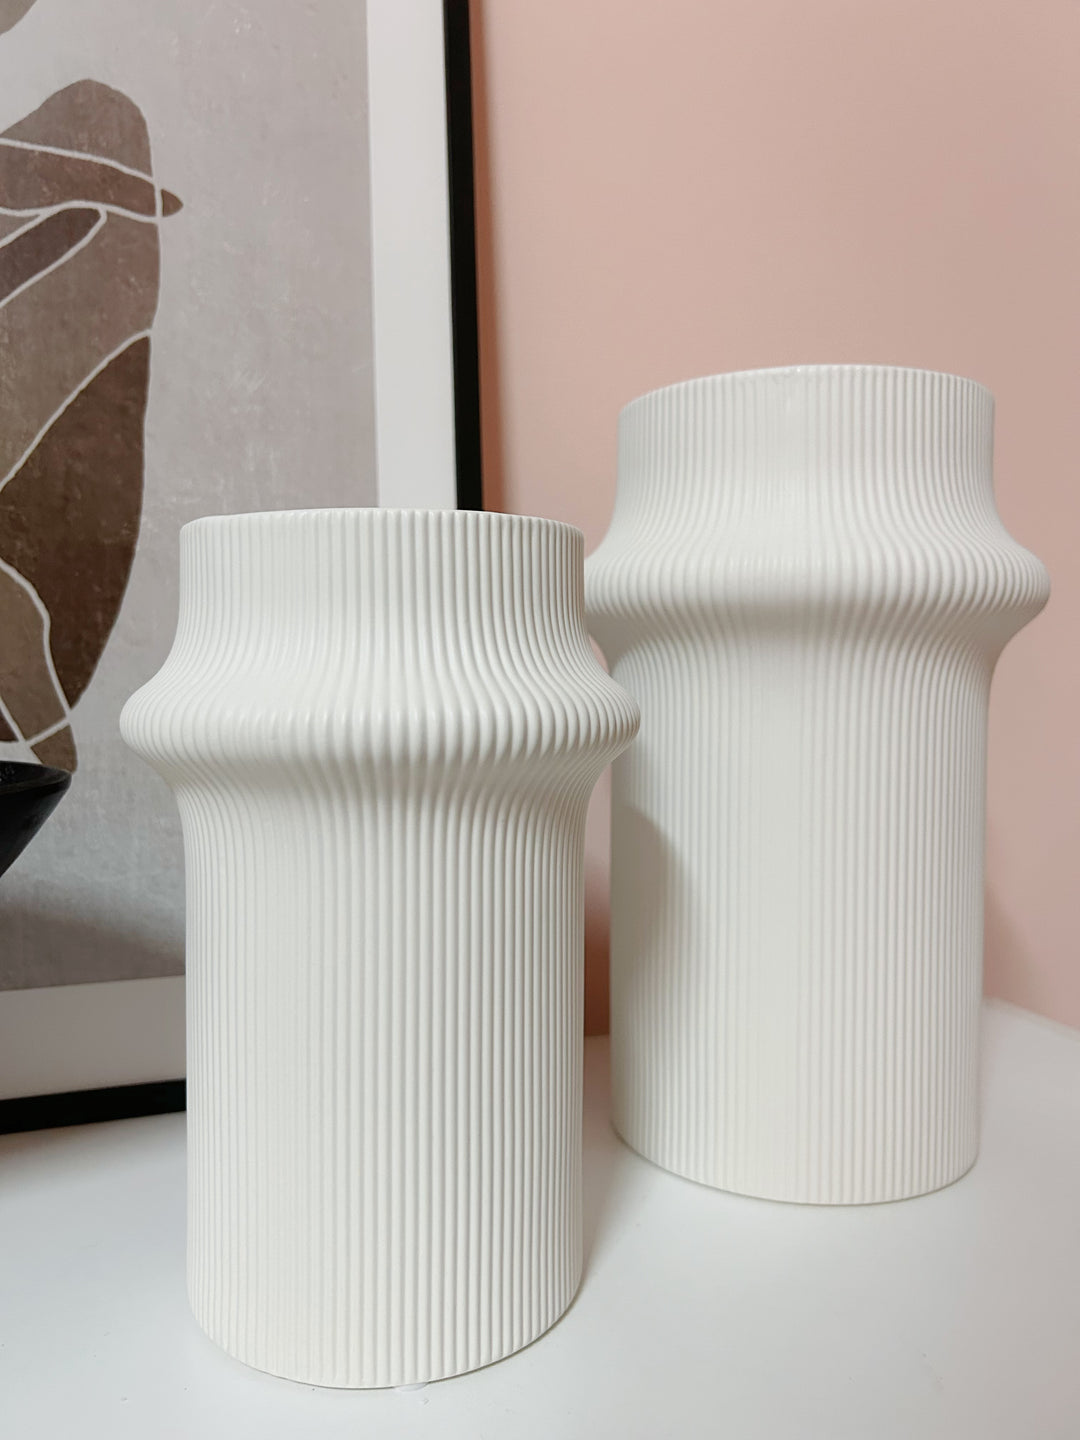 PRE-ORDER (6-10 May): Sleek Fluted Grove Vases (2 sizes)